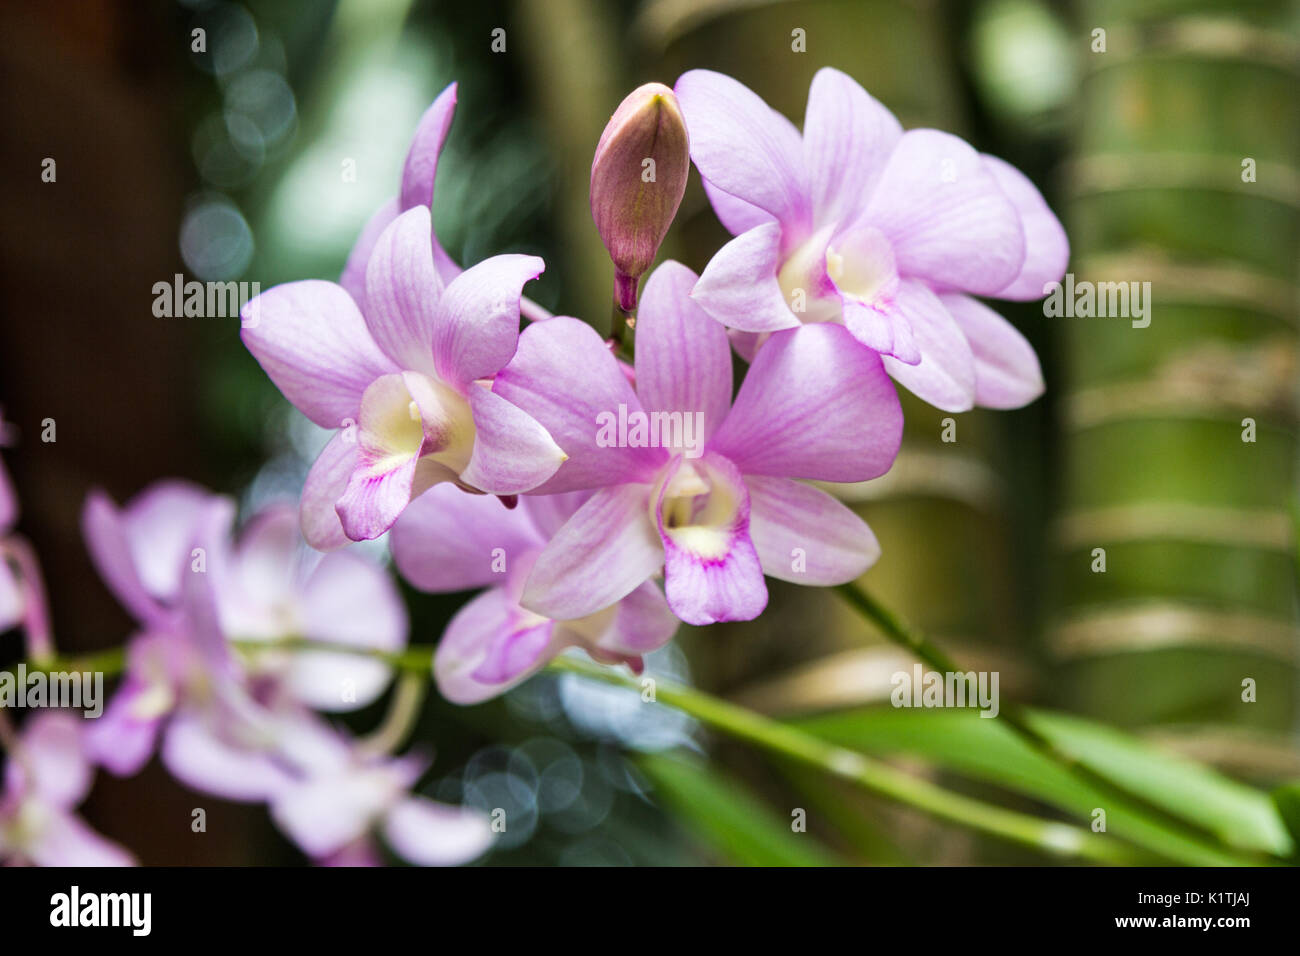 Lilac orchid (Orchidaceae) Stock Photo